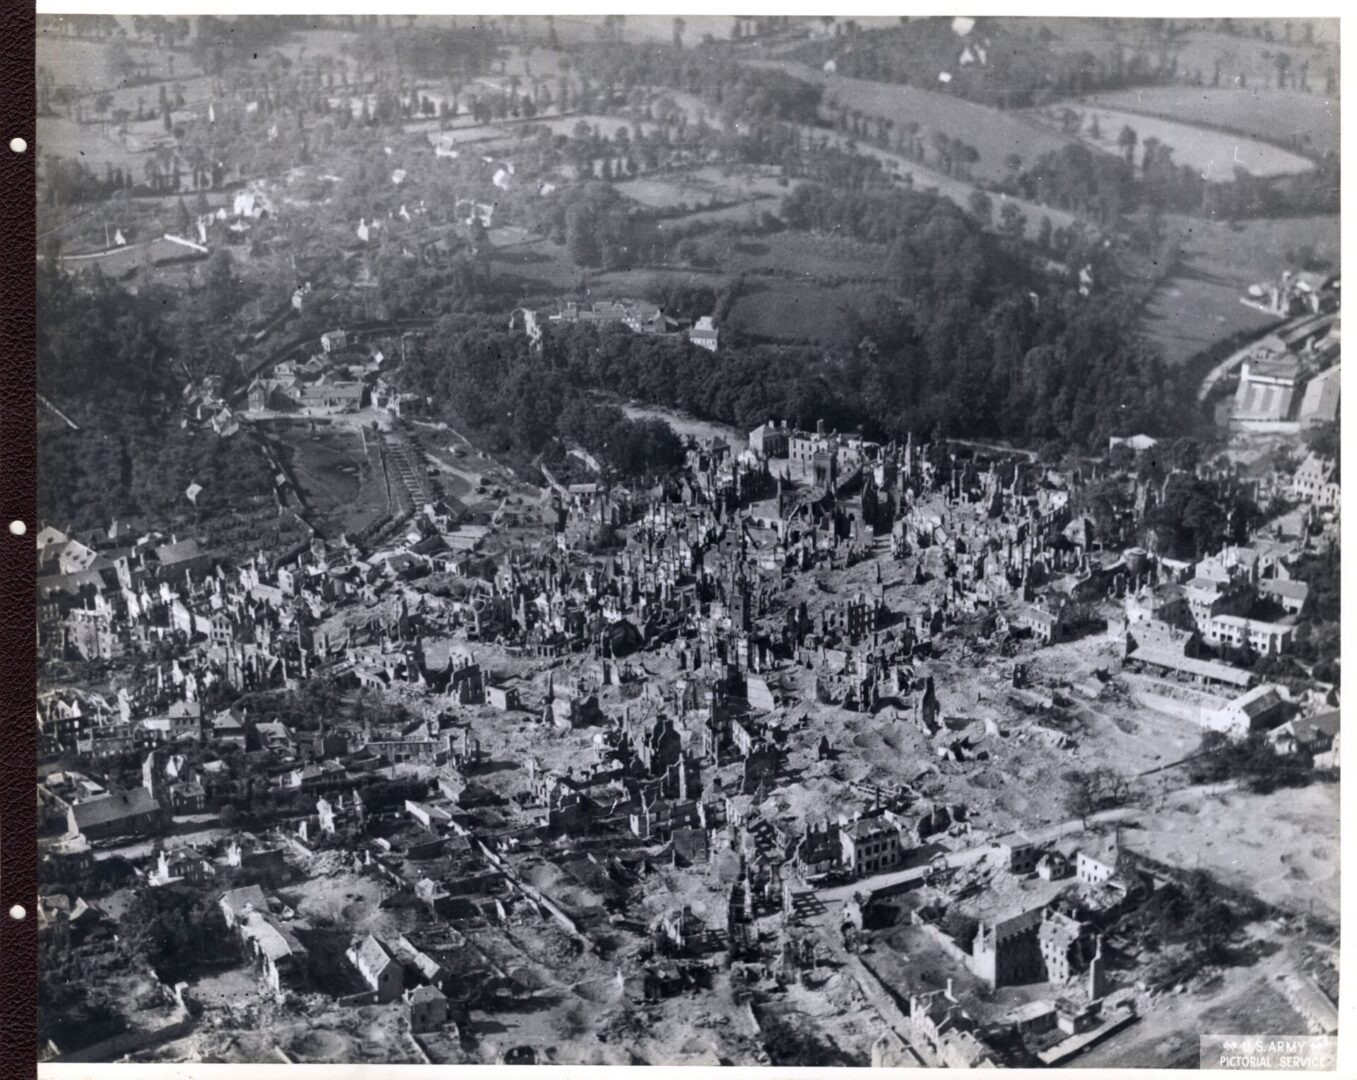 Aerial photo of a town destroyed by artillery fire